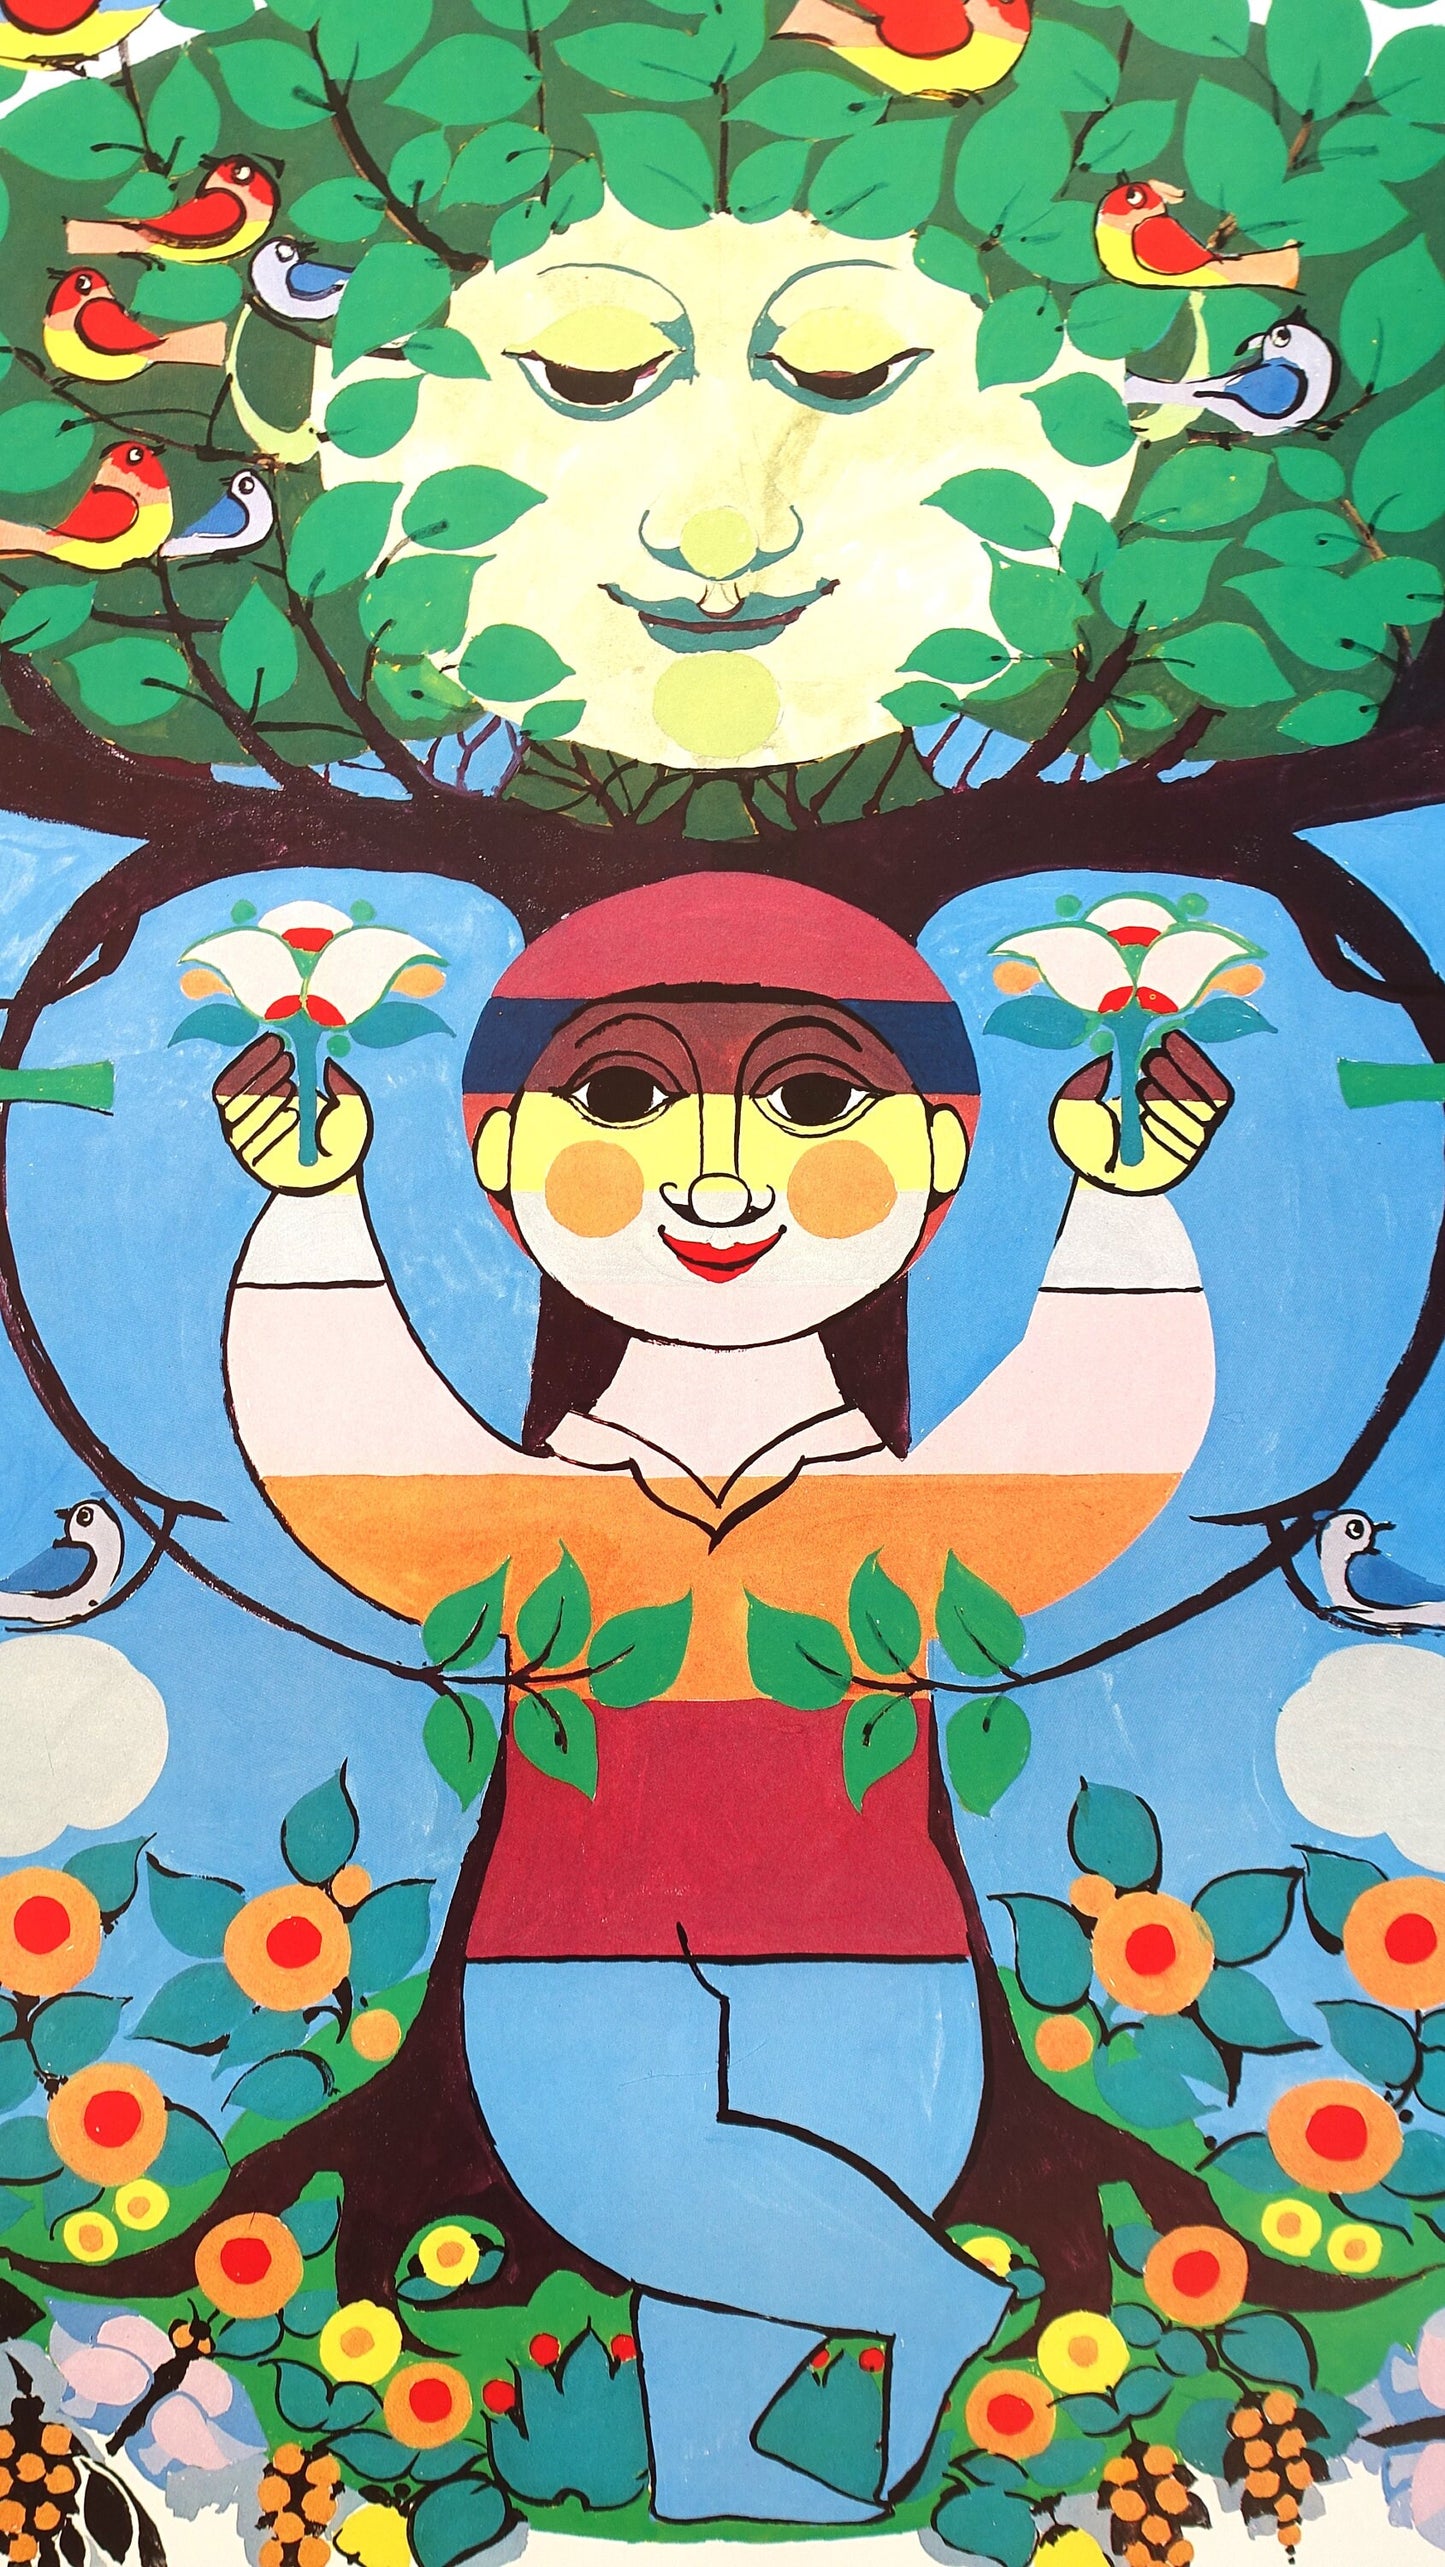 1986 Wiinblad For Every Child a Tree - Original Vintage Poster